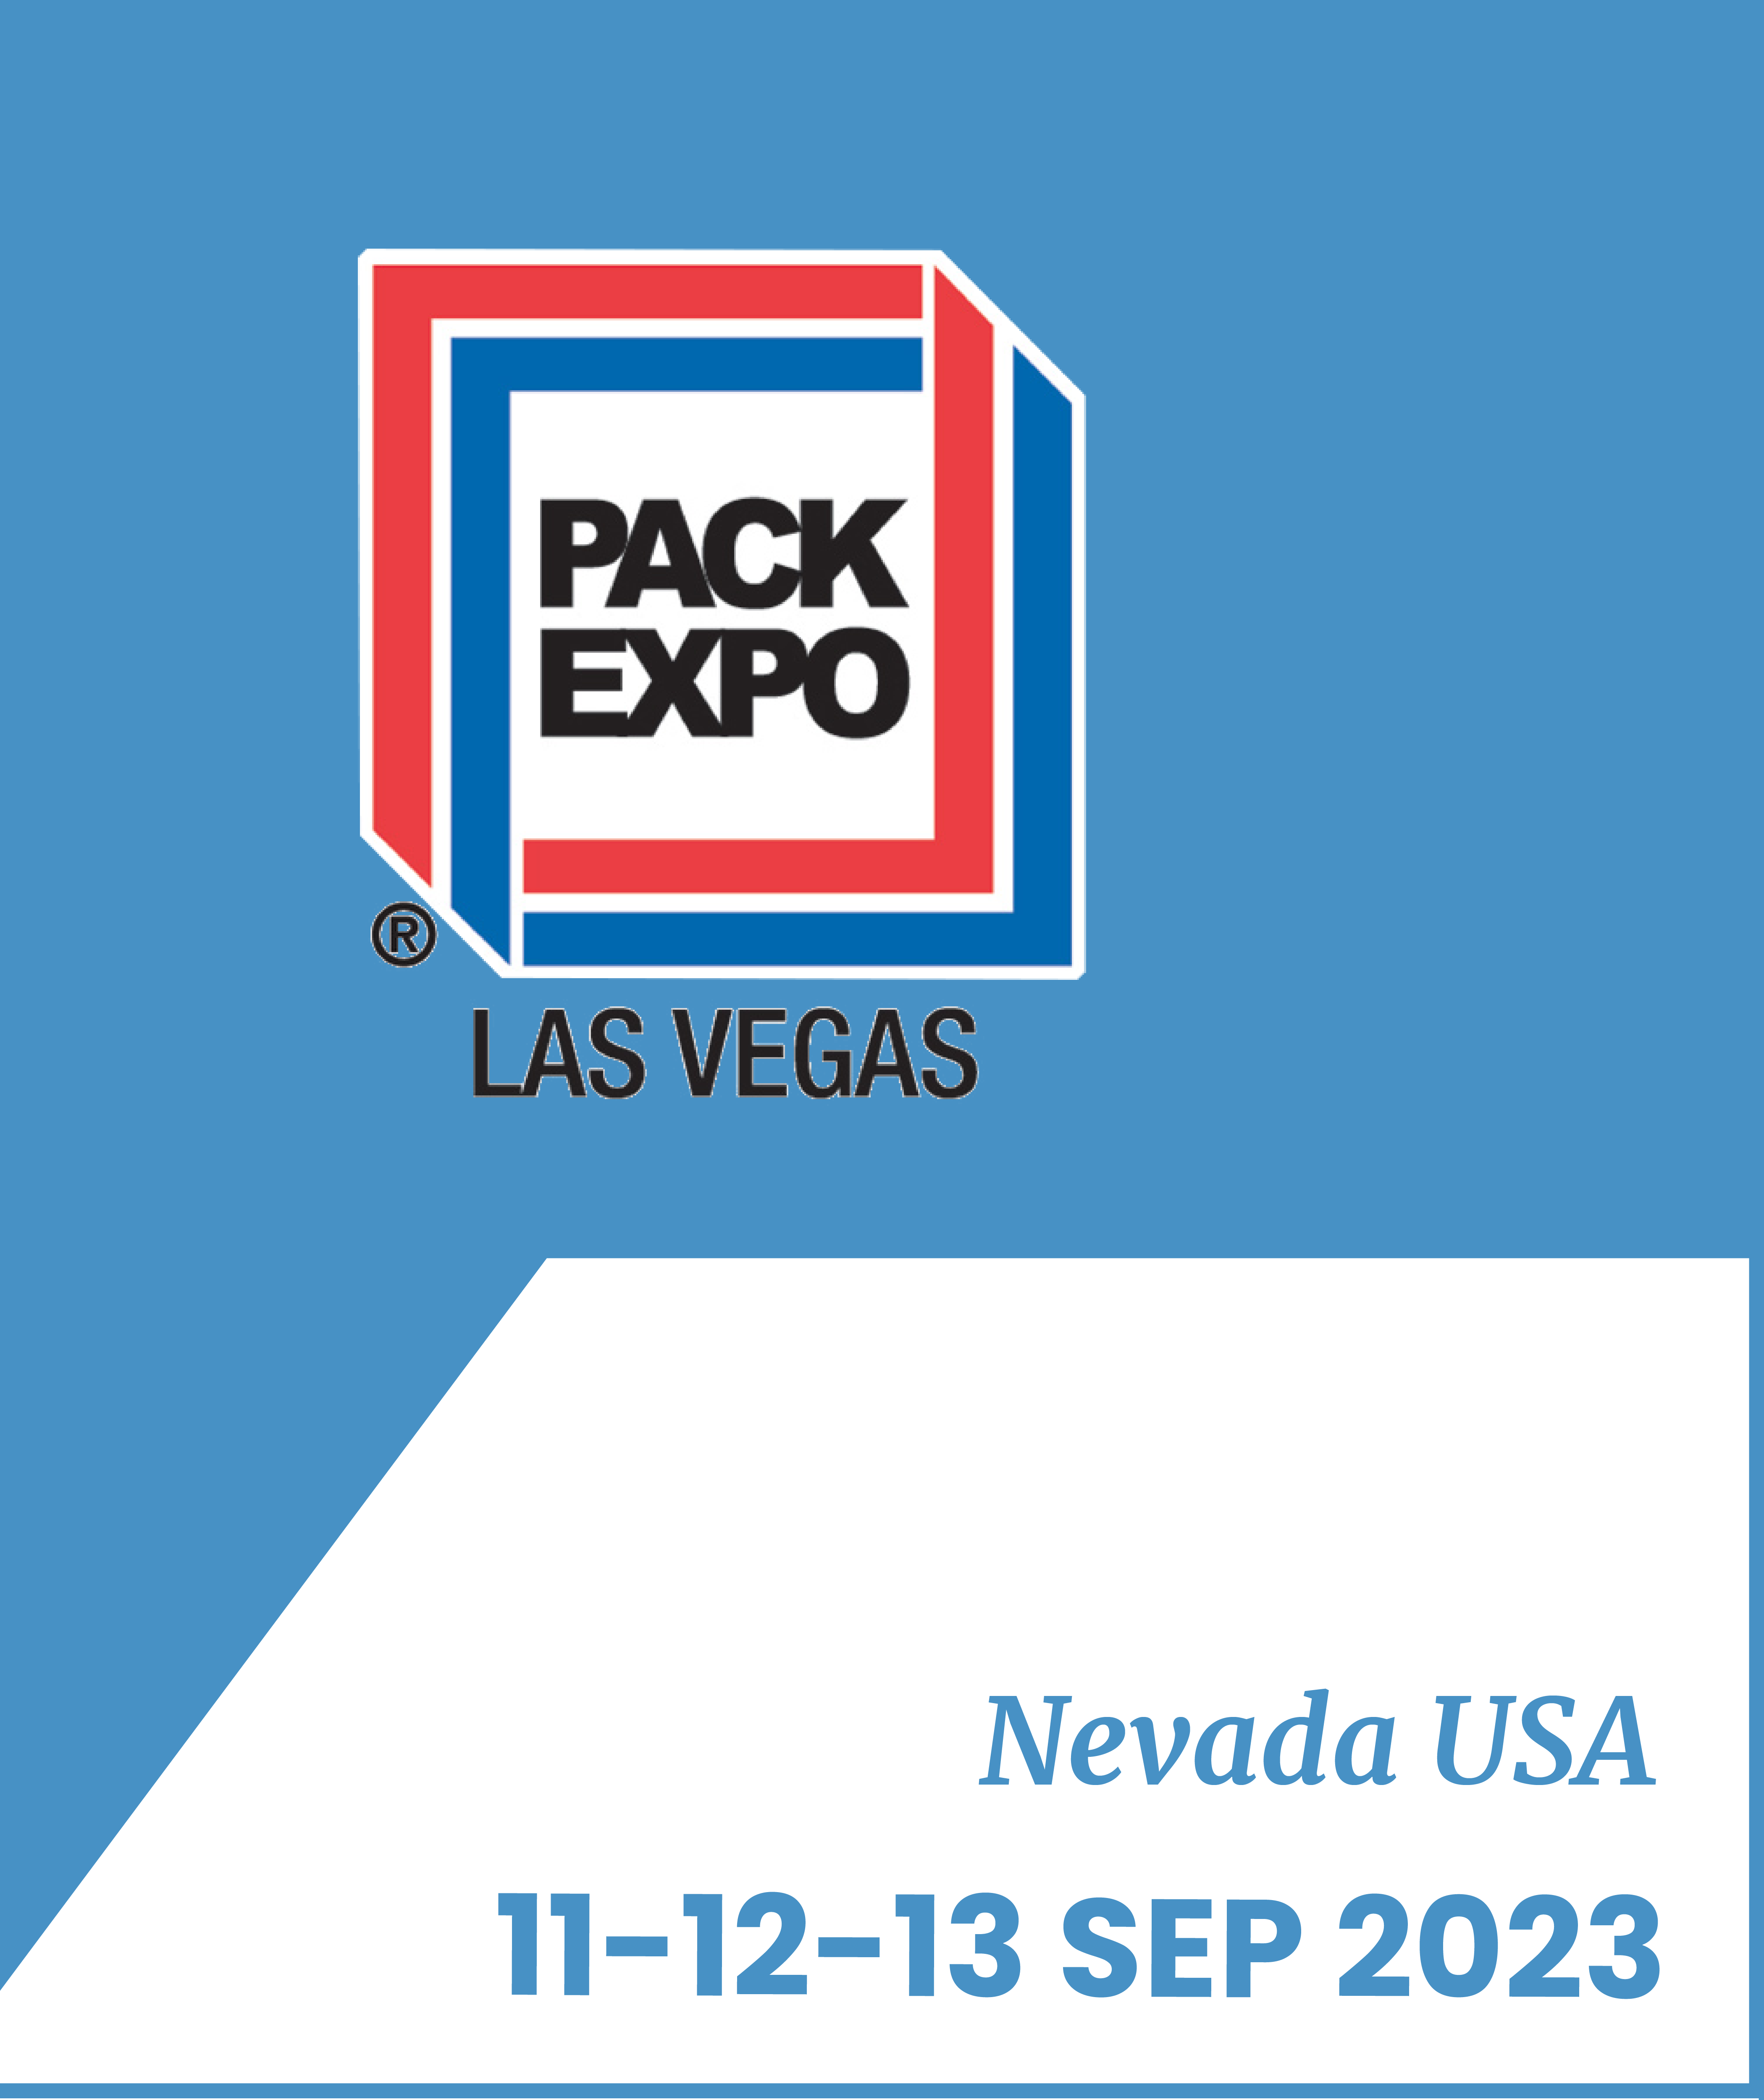 Pack Expo, 11-13 SEP 2023, Nevada